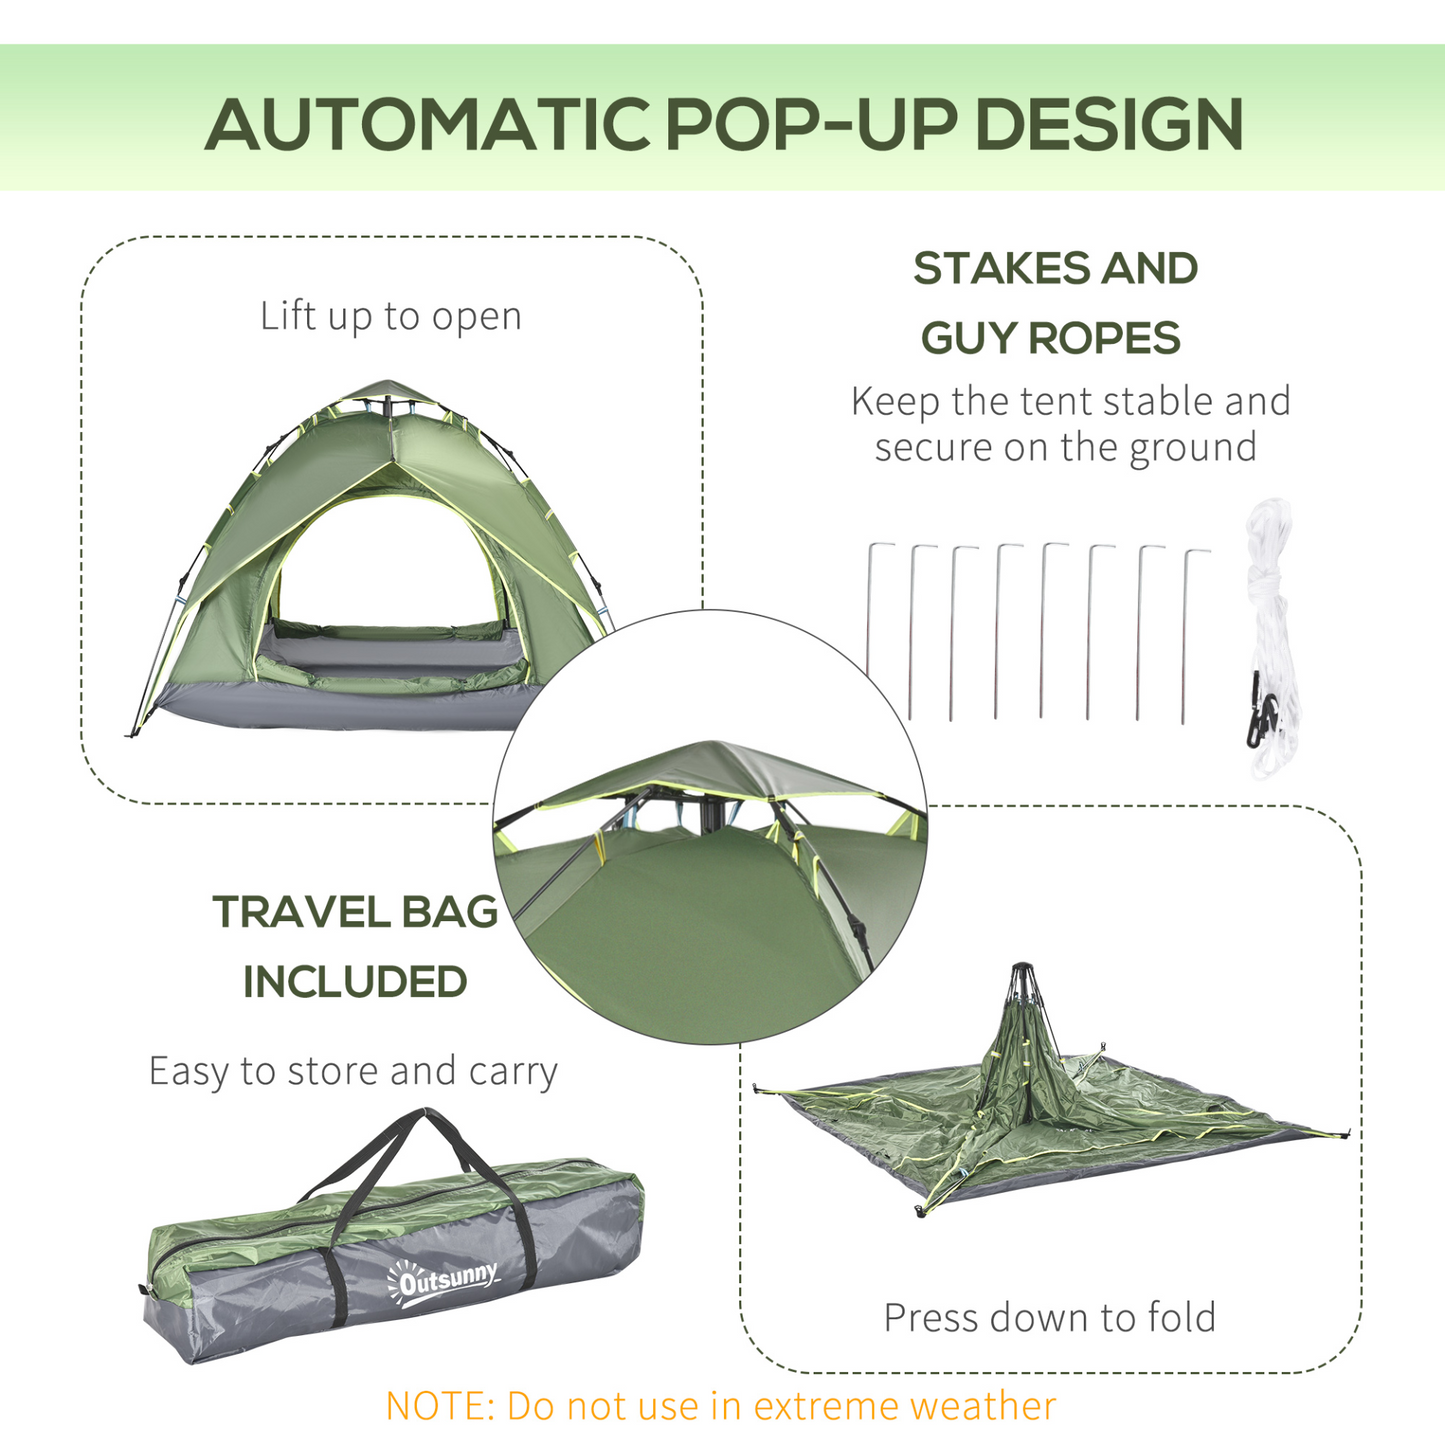 Outsunny 2 Man Pop Up Tent Camping Festival Hiking Family Travel Shelter Portable Double Layer Automatic Outdoor